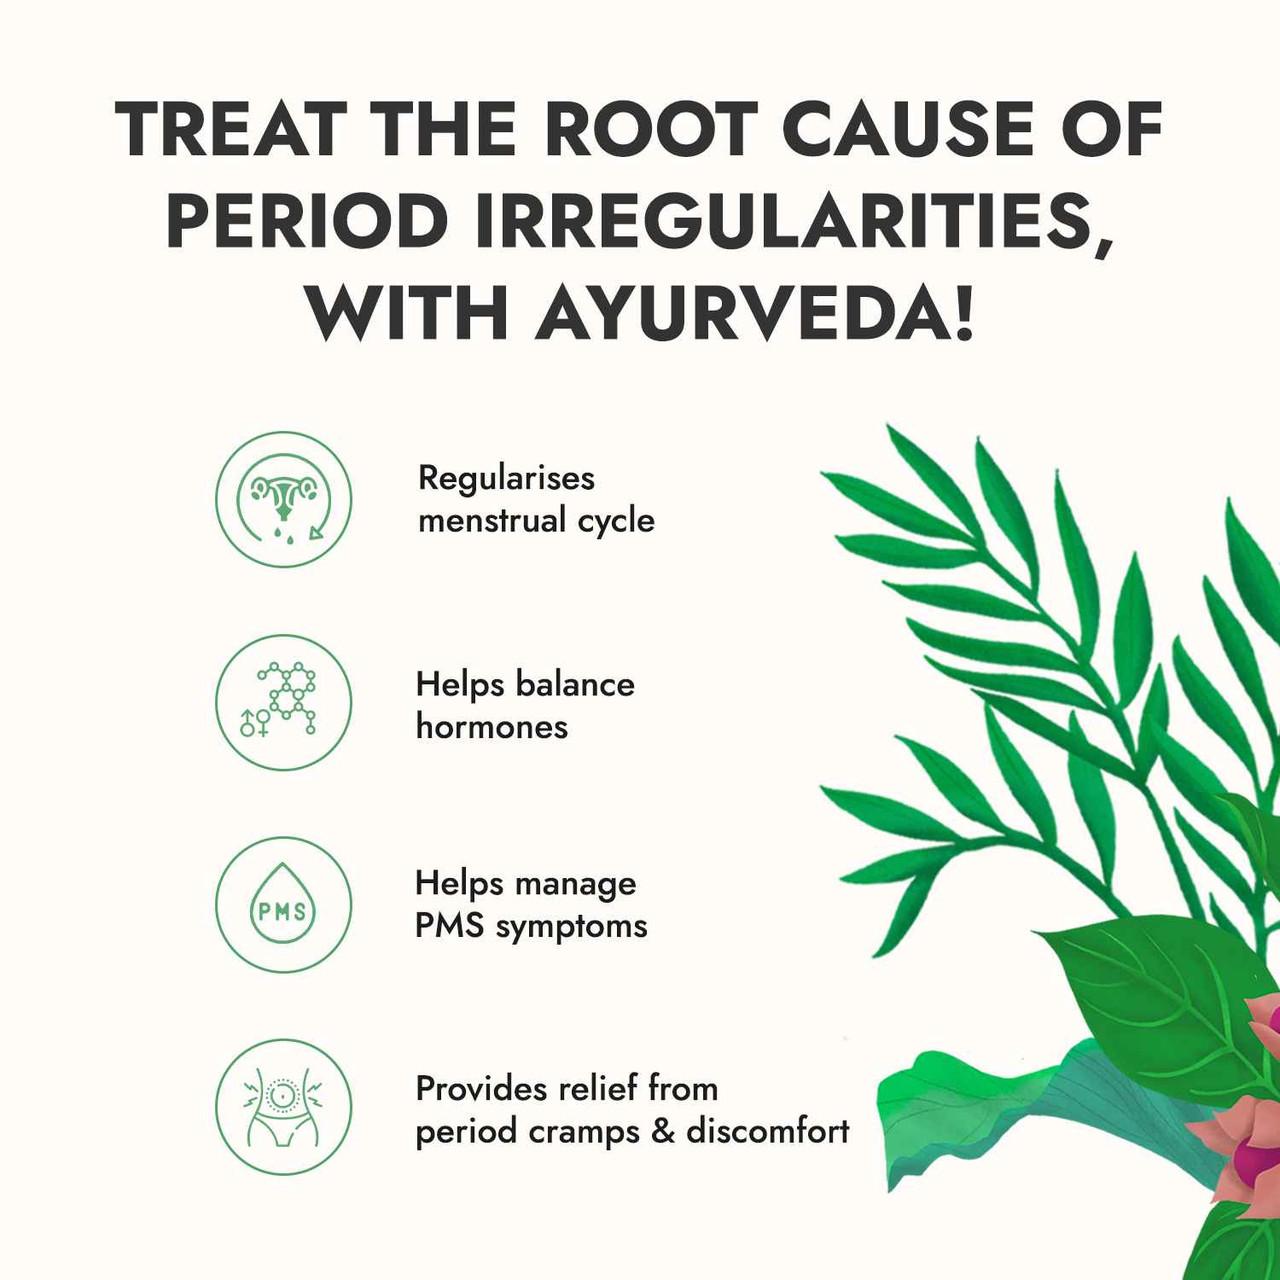 97% women got relief from period pain & cramps in 3 months.

An Ayurvedic Elixir that treats irregular periods. It may also provide relief from conditions like PCOS/PCOD. Made with 5 research backed ayurvedic herbs, it balances hormonal levels naturally.